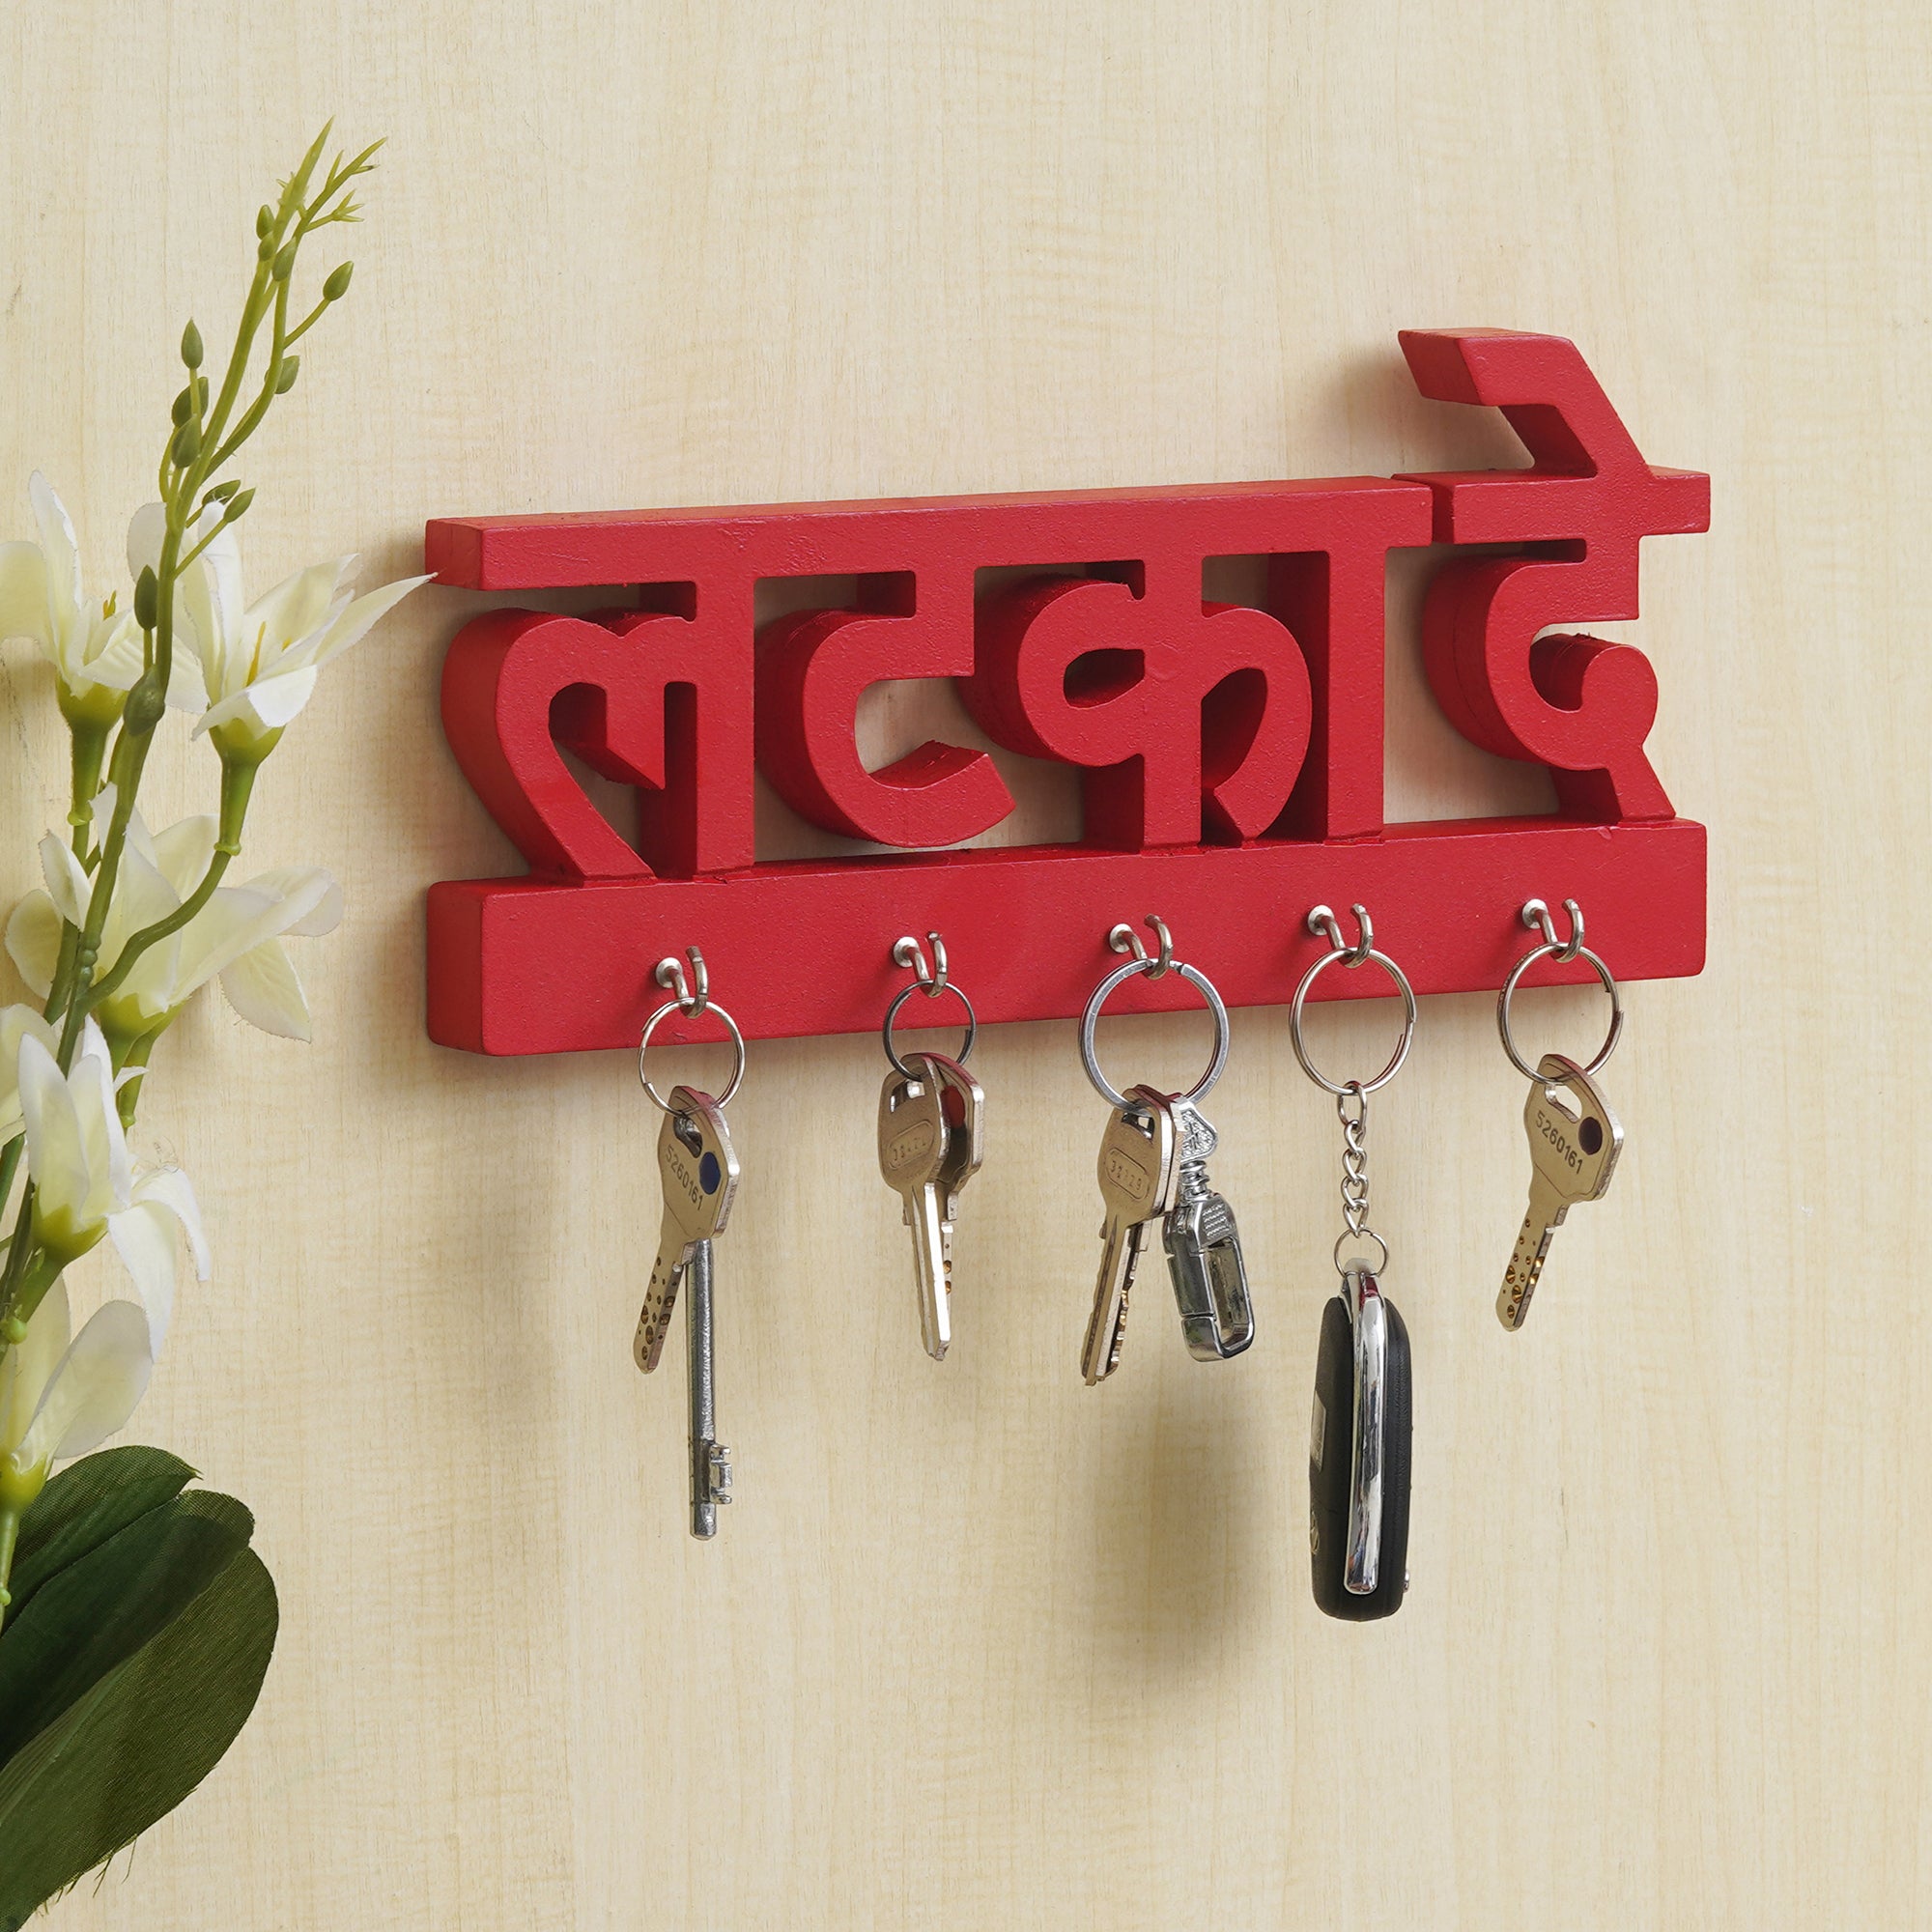 eCraftIndia Red "Latka De" Decorative Wooden Cutout Key Holder with 3 Key Hooks For Wall